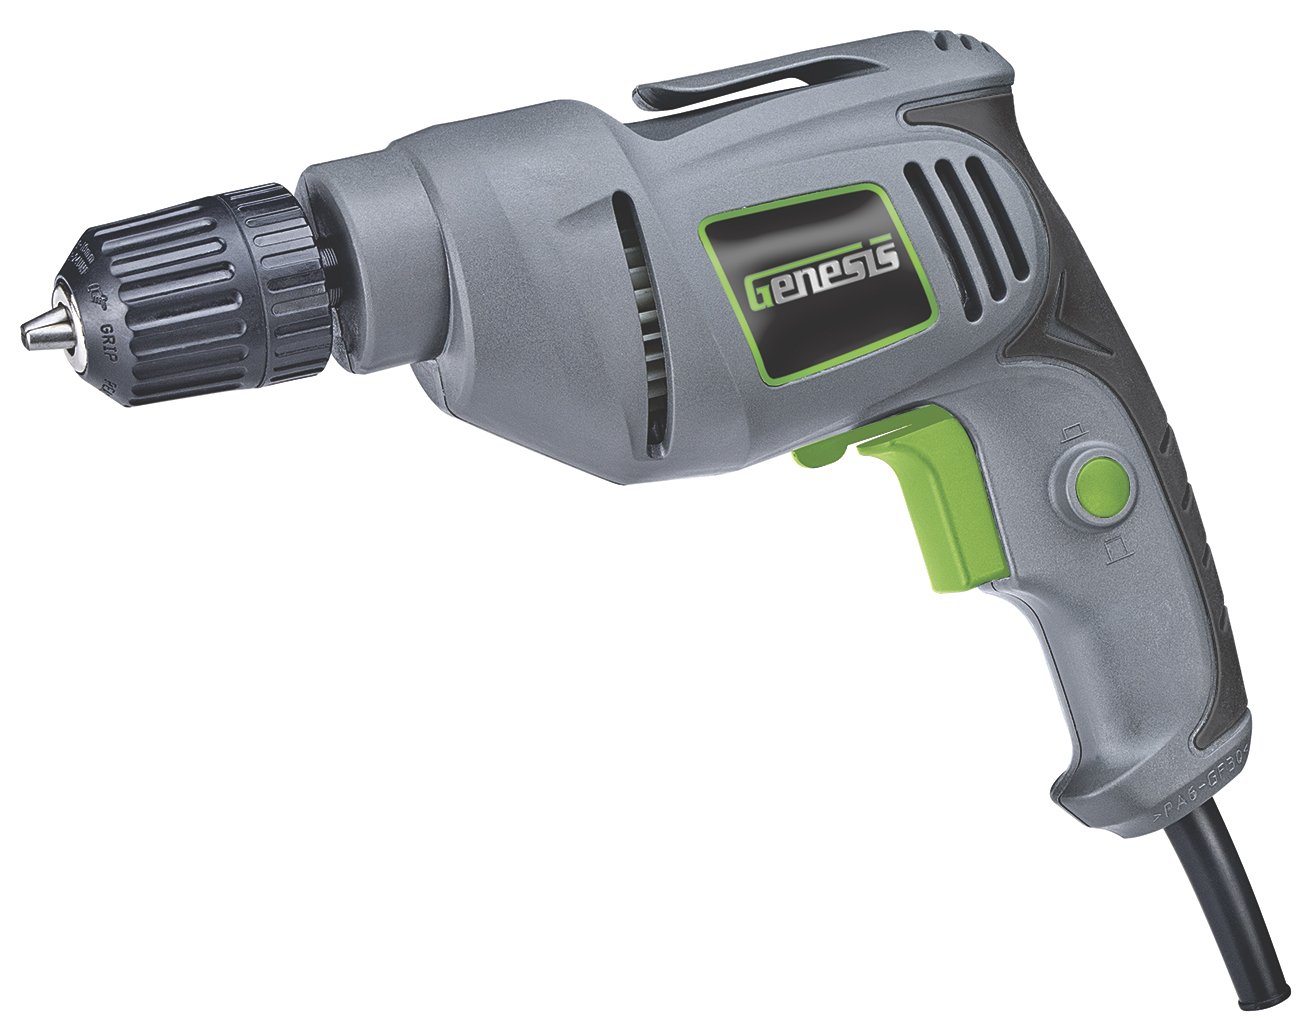 Genesis 4.2 Amp Corded Drill Variable Speed Reversible Electric with 3/8-Inch Keyless Chuck, Belt Clip, Rubberized Grip, Lock-On Button and 2 Year Warranty (GD38B)